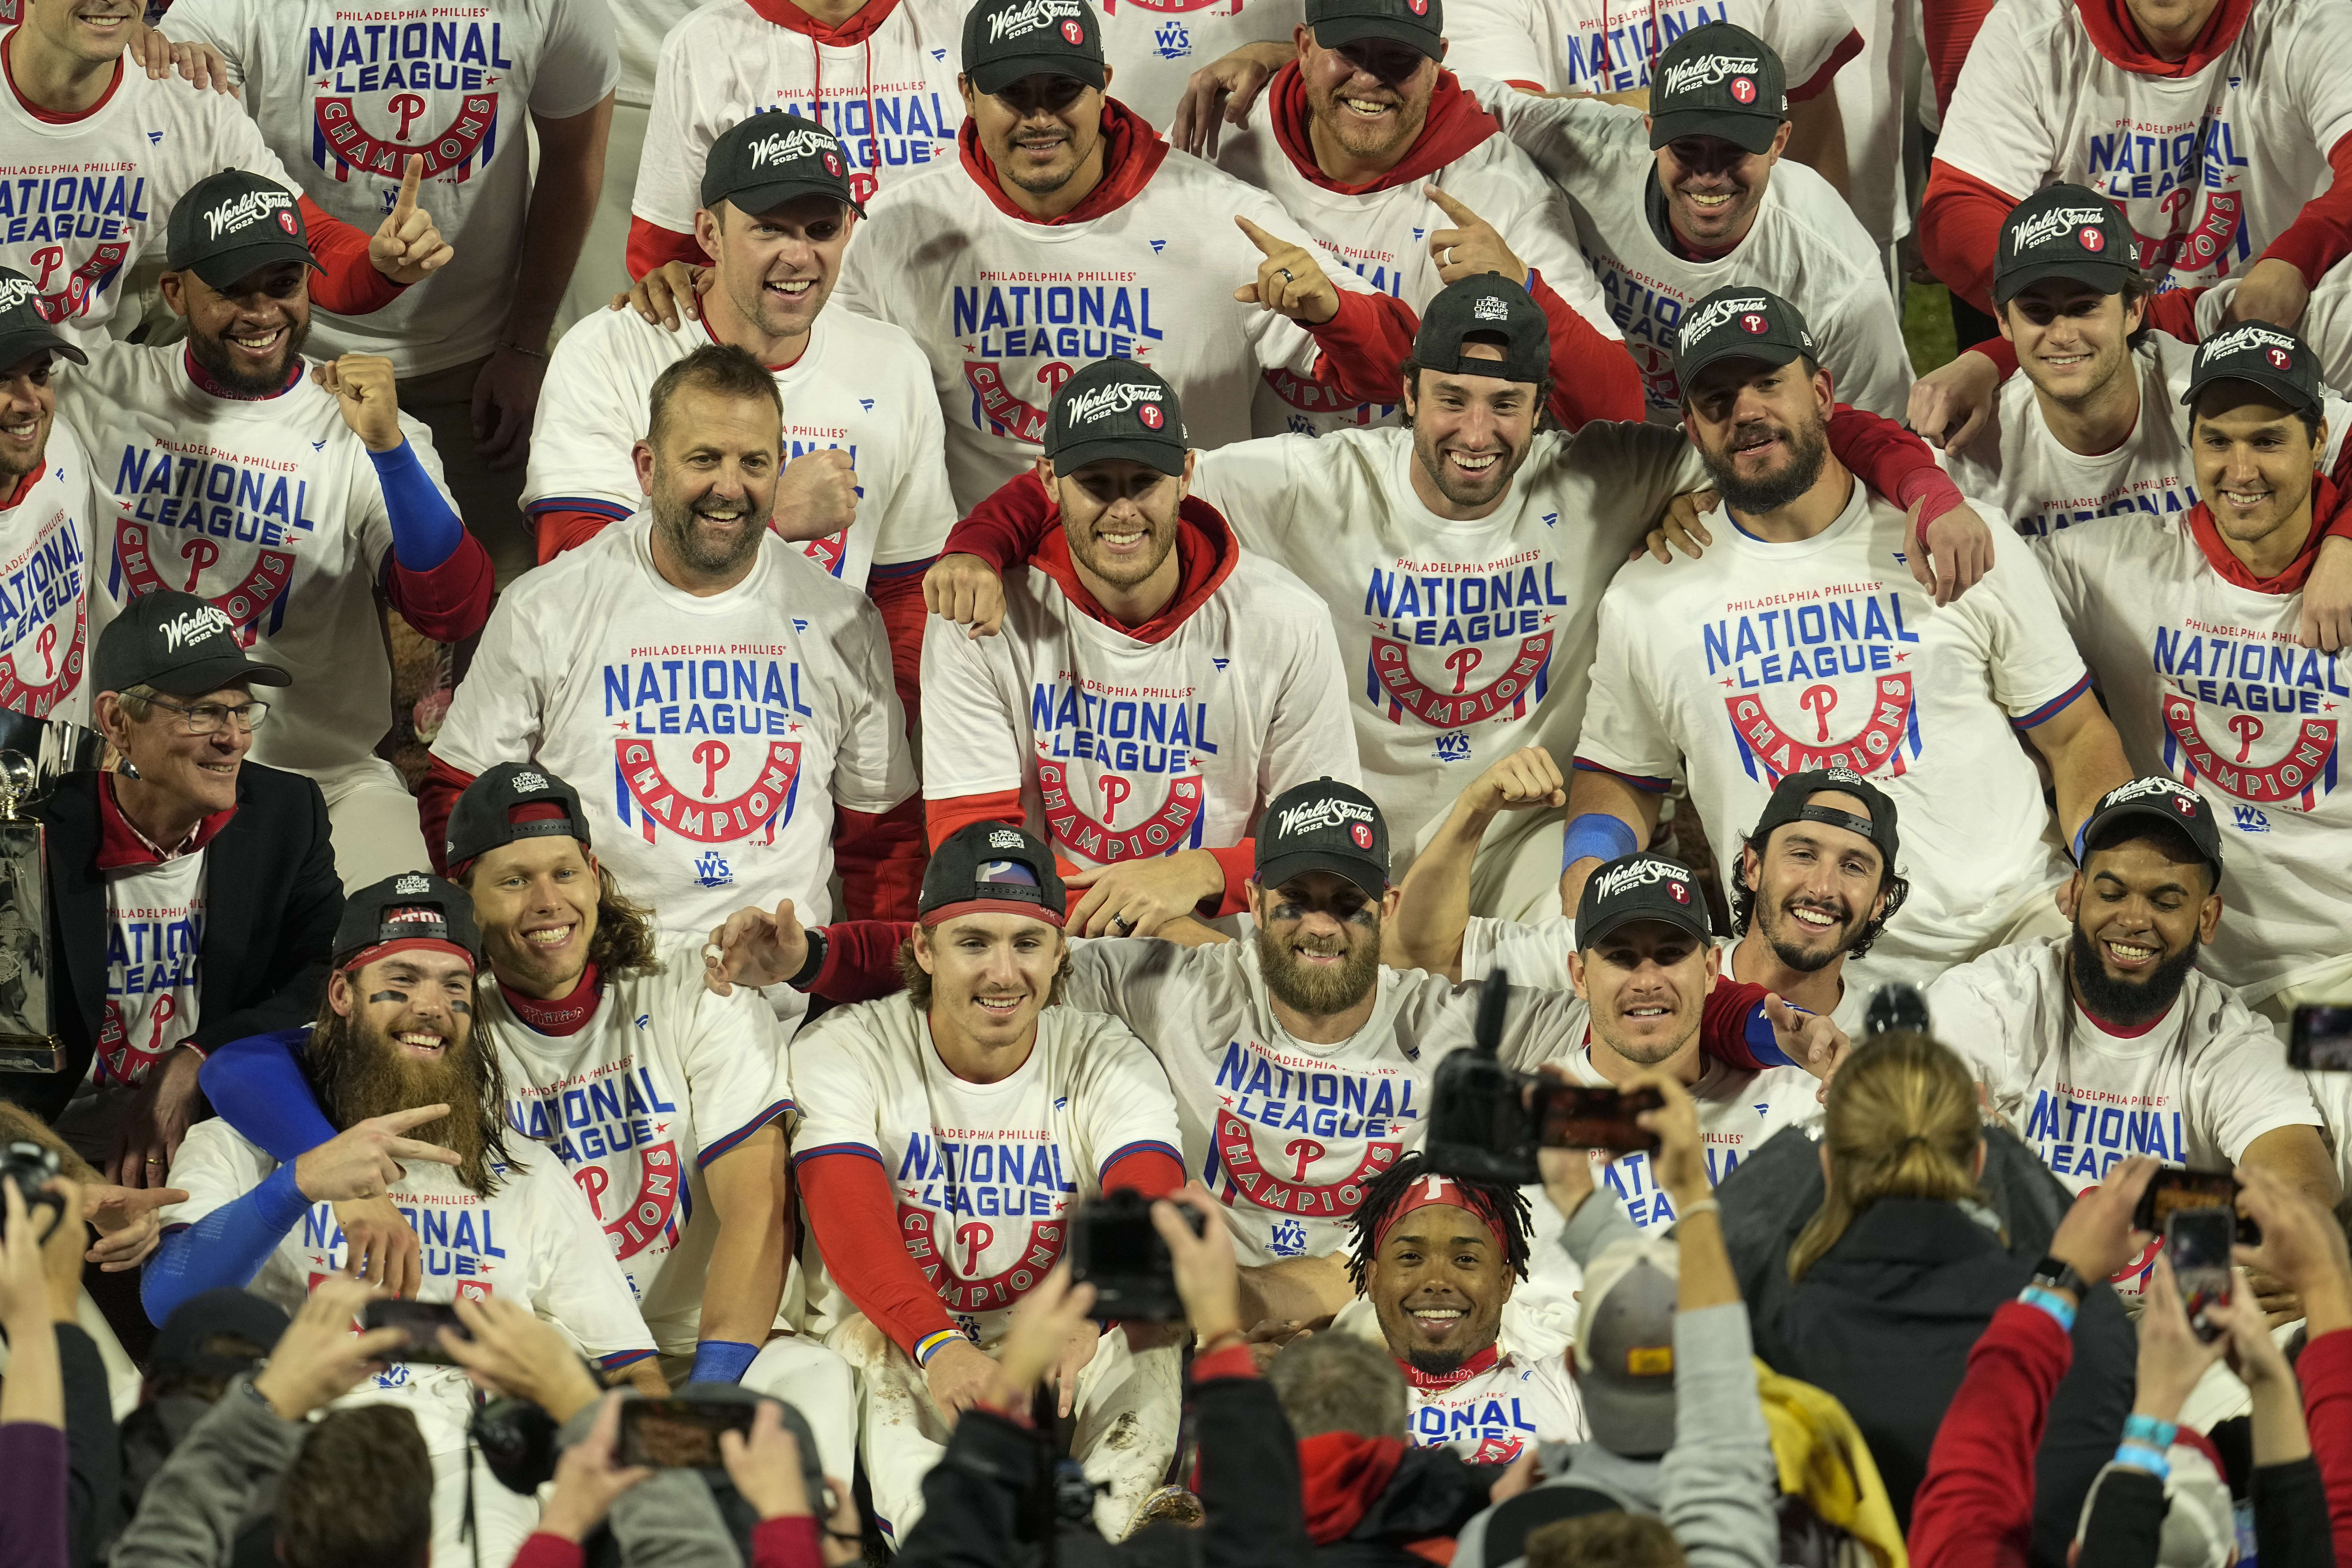 This year's World Series marks troubling milestone for Major League Baseball